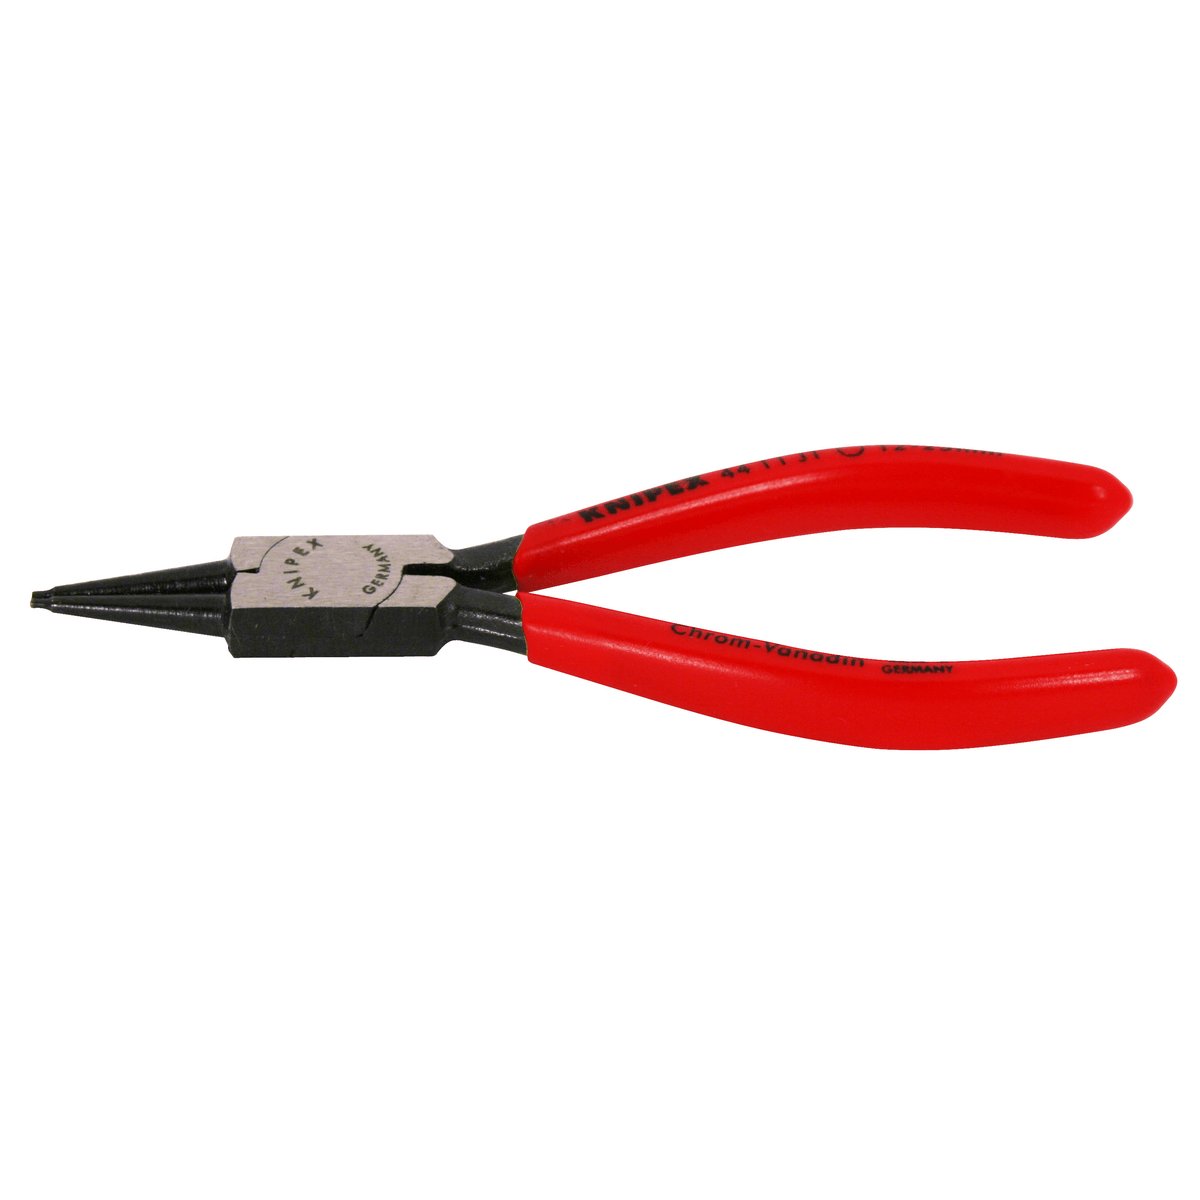 Knipex 4411J1 Internal Straight Retaining Ring Pliers 5.75-Inch by Knipex